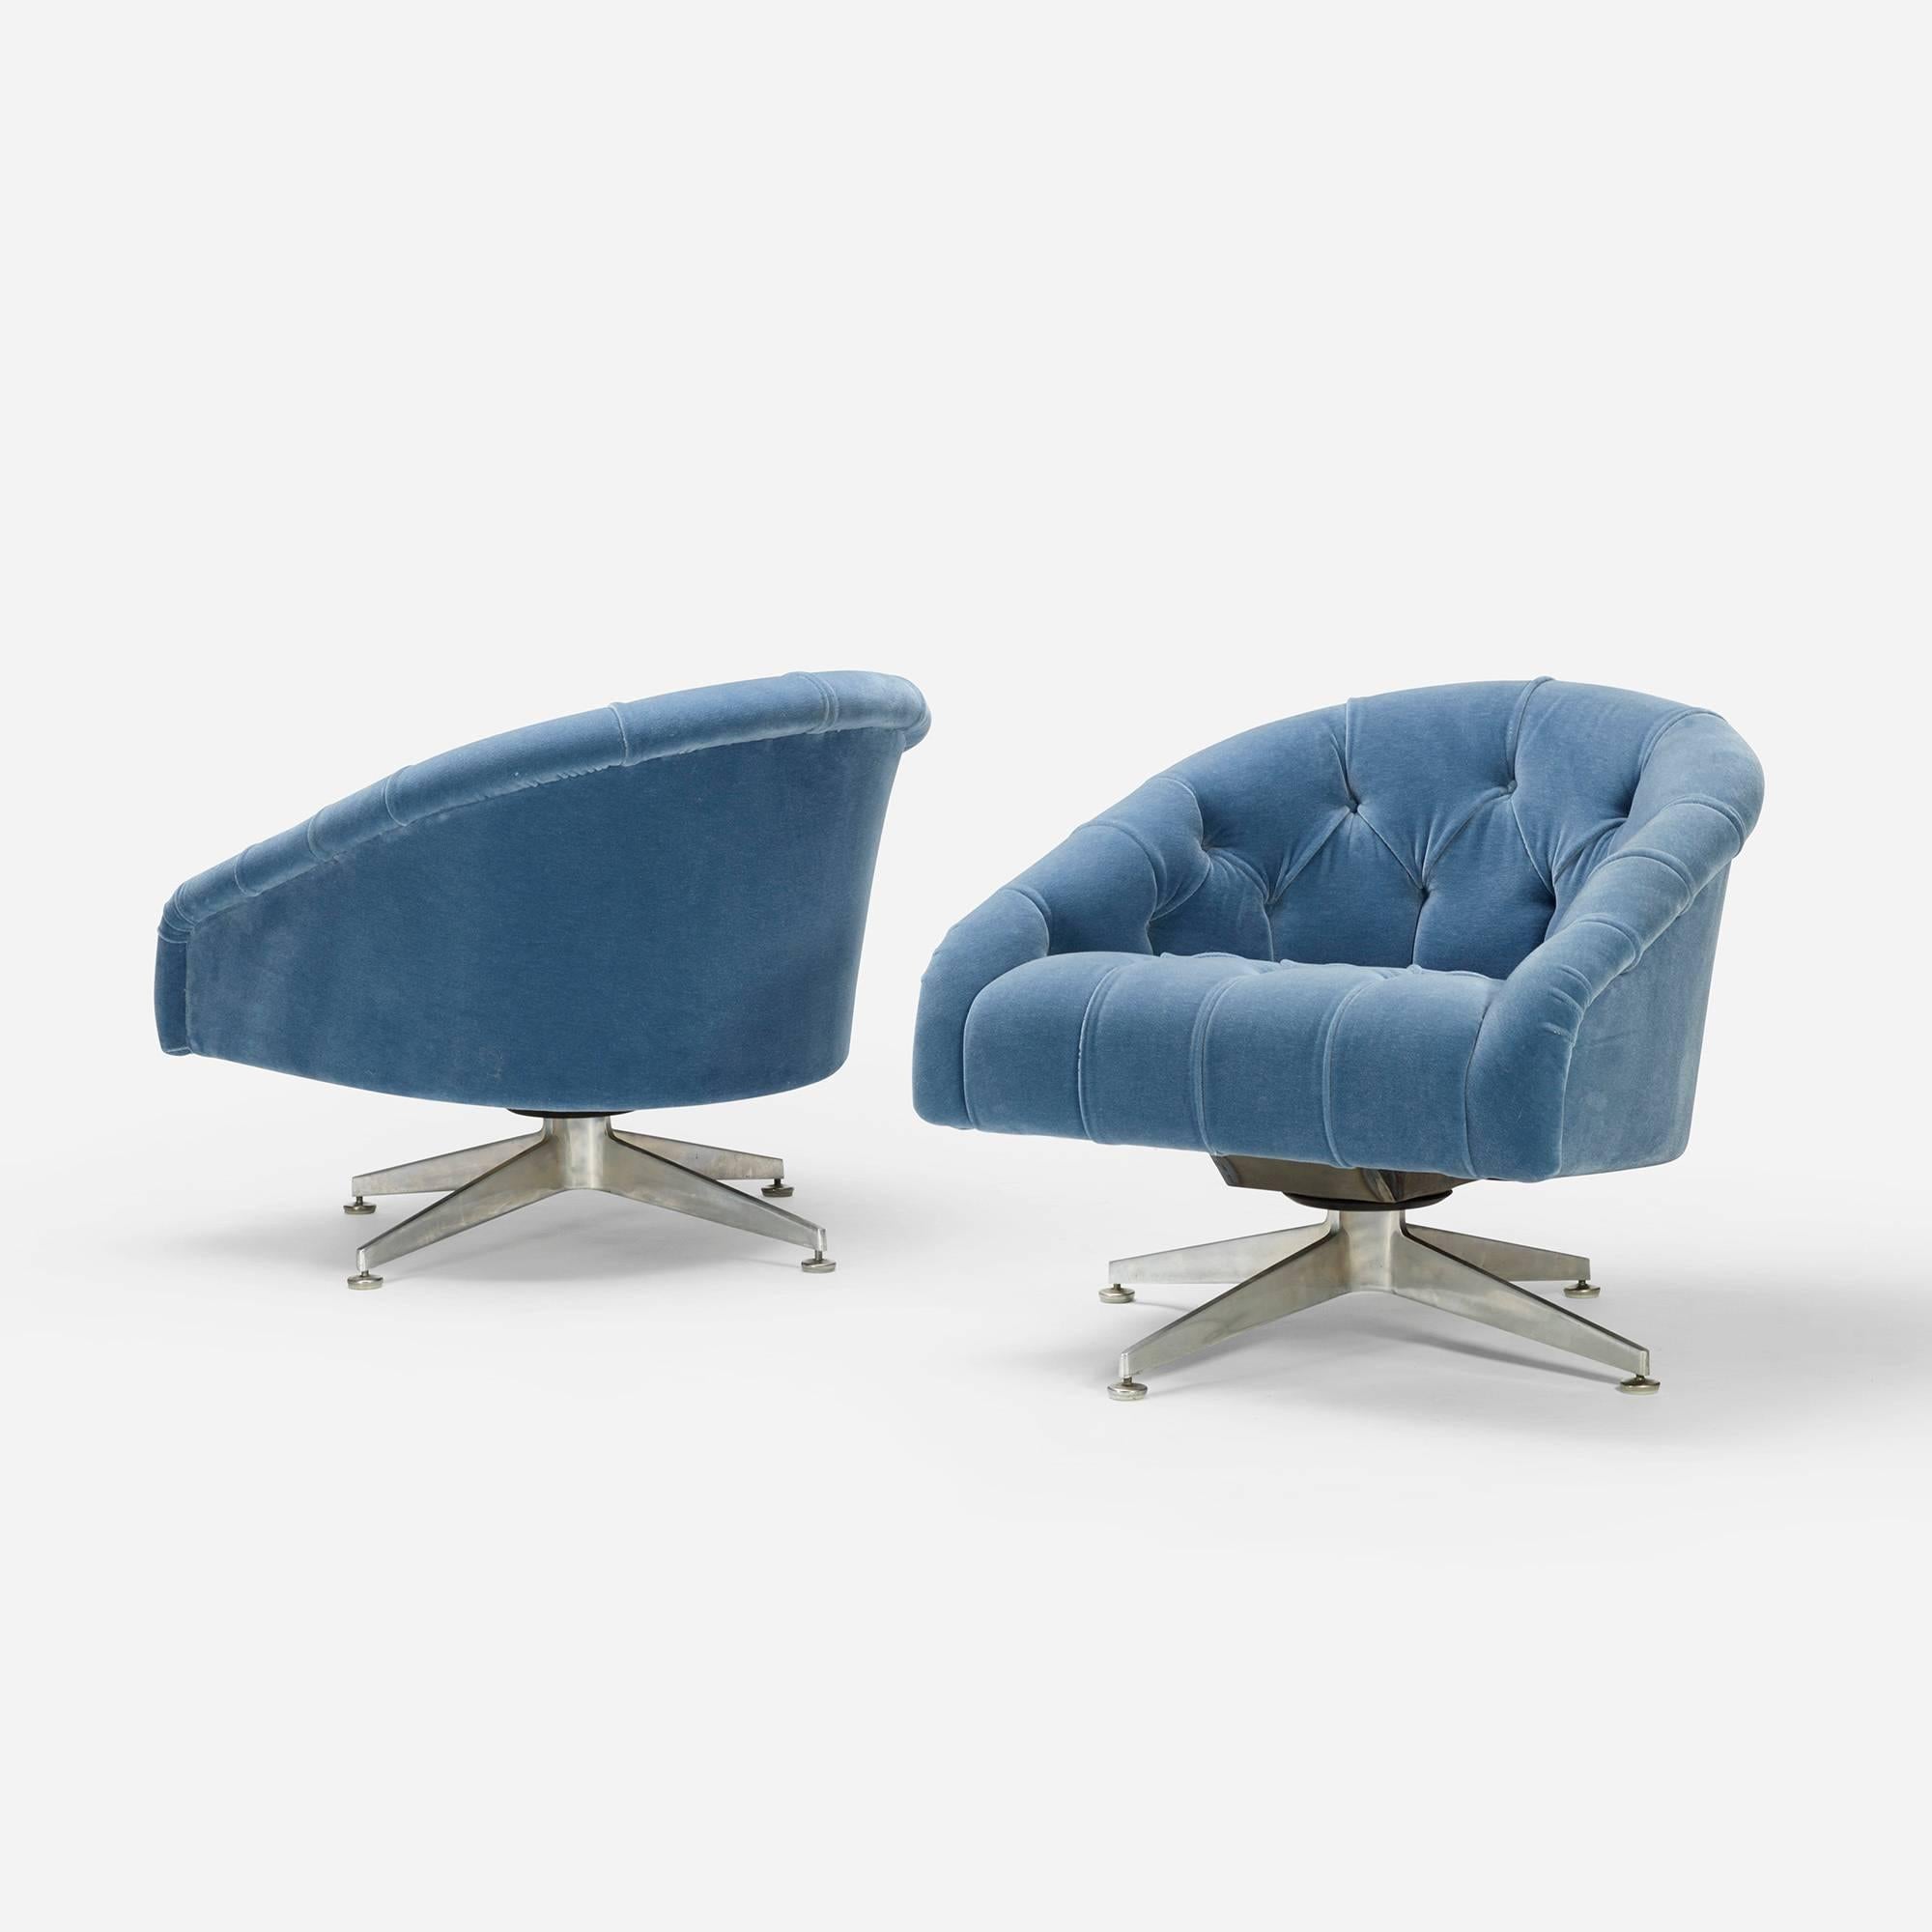 Compact, comfortable swivel chairs restored in a versatile blue mohair.